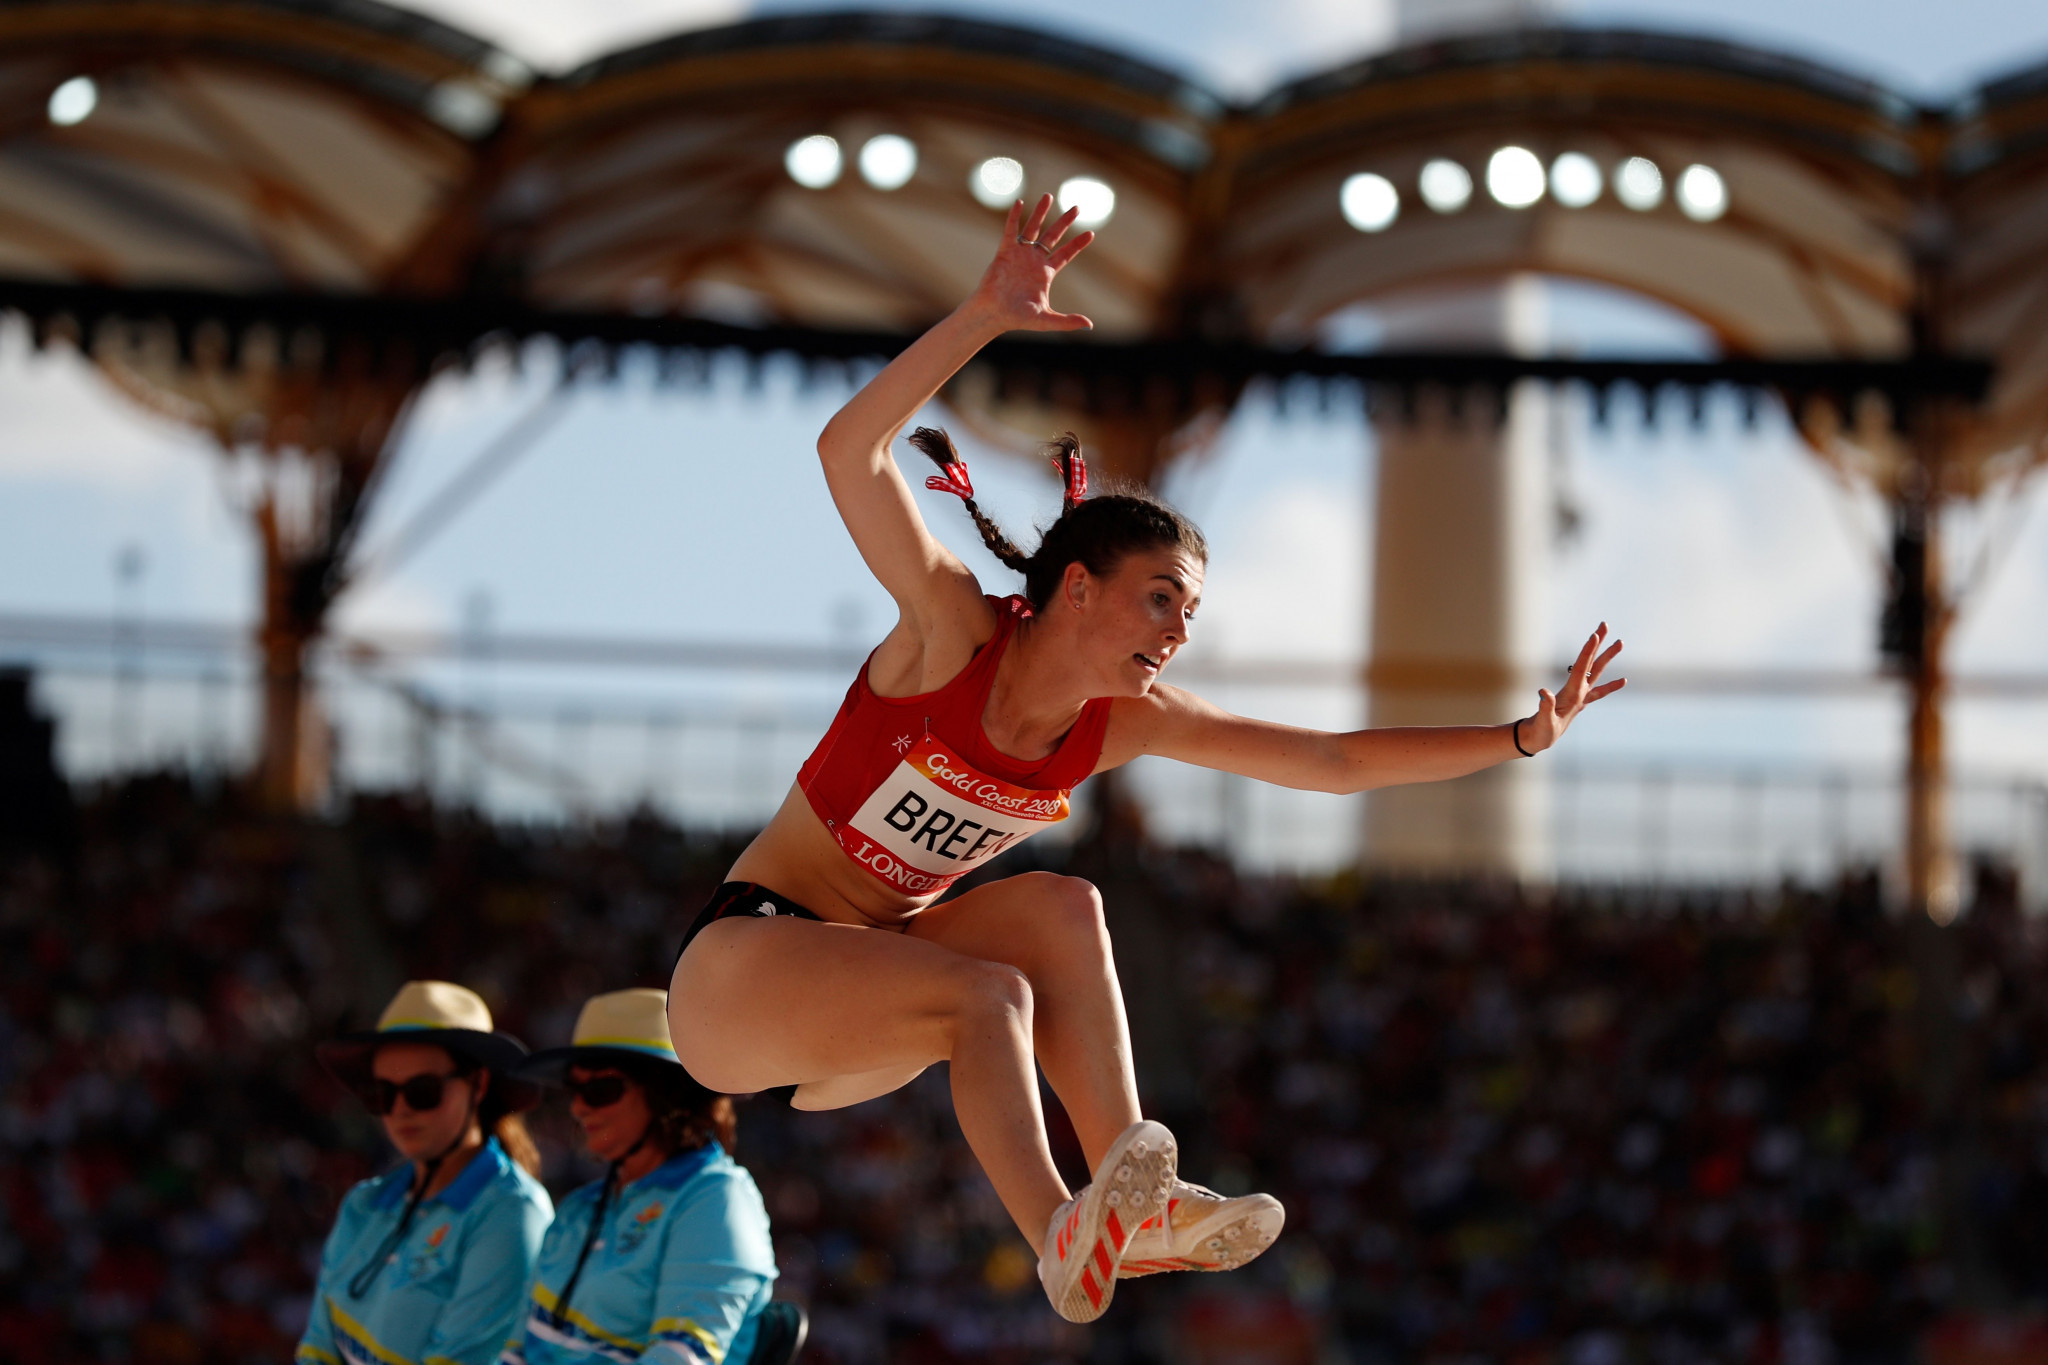 Wales' Olivia Breen won the women's T38 long jump with a Commonwealth Games record and personal best of 4.86 metres ©Getty Images 